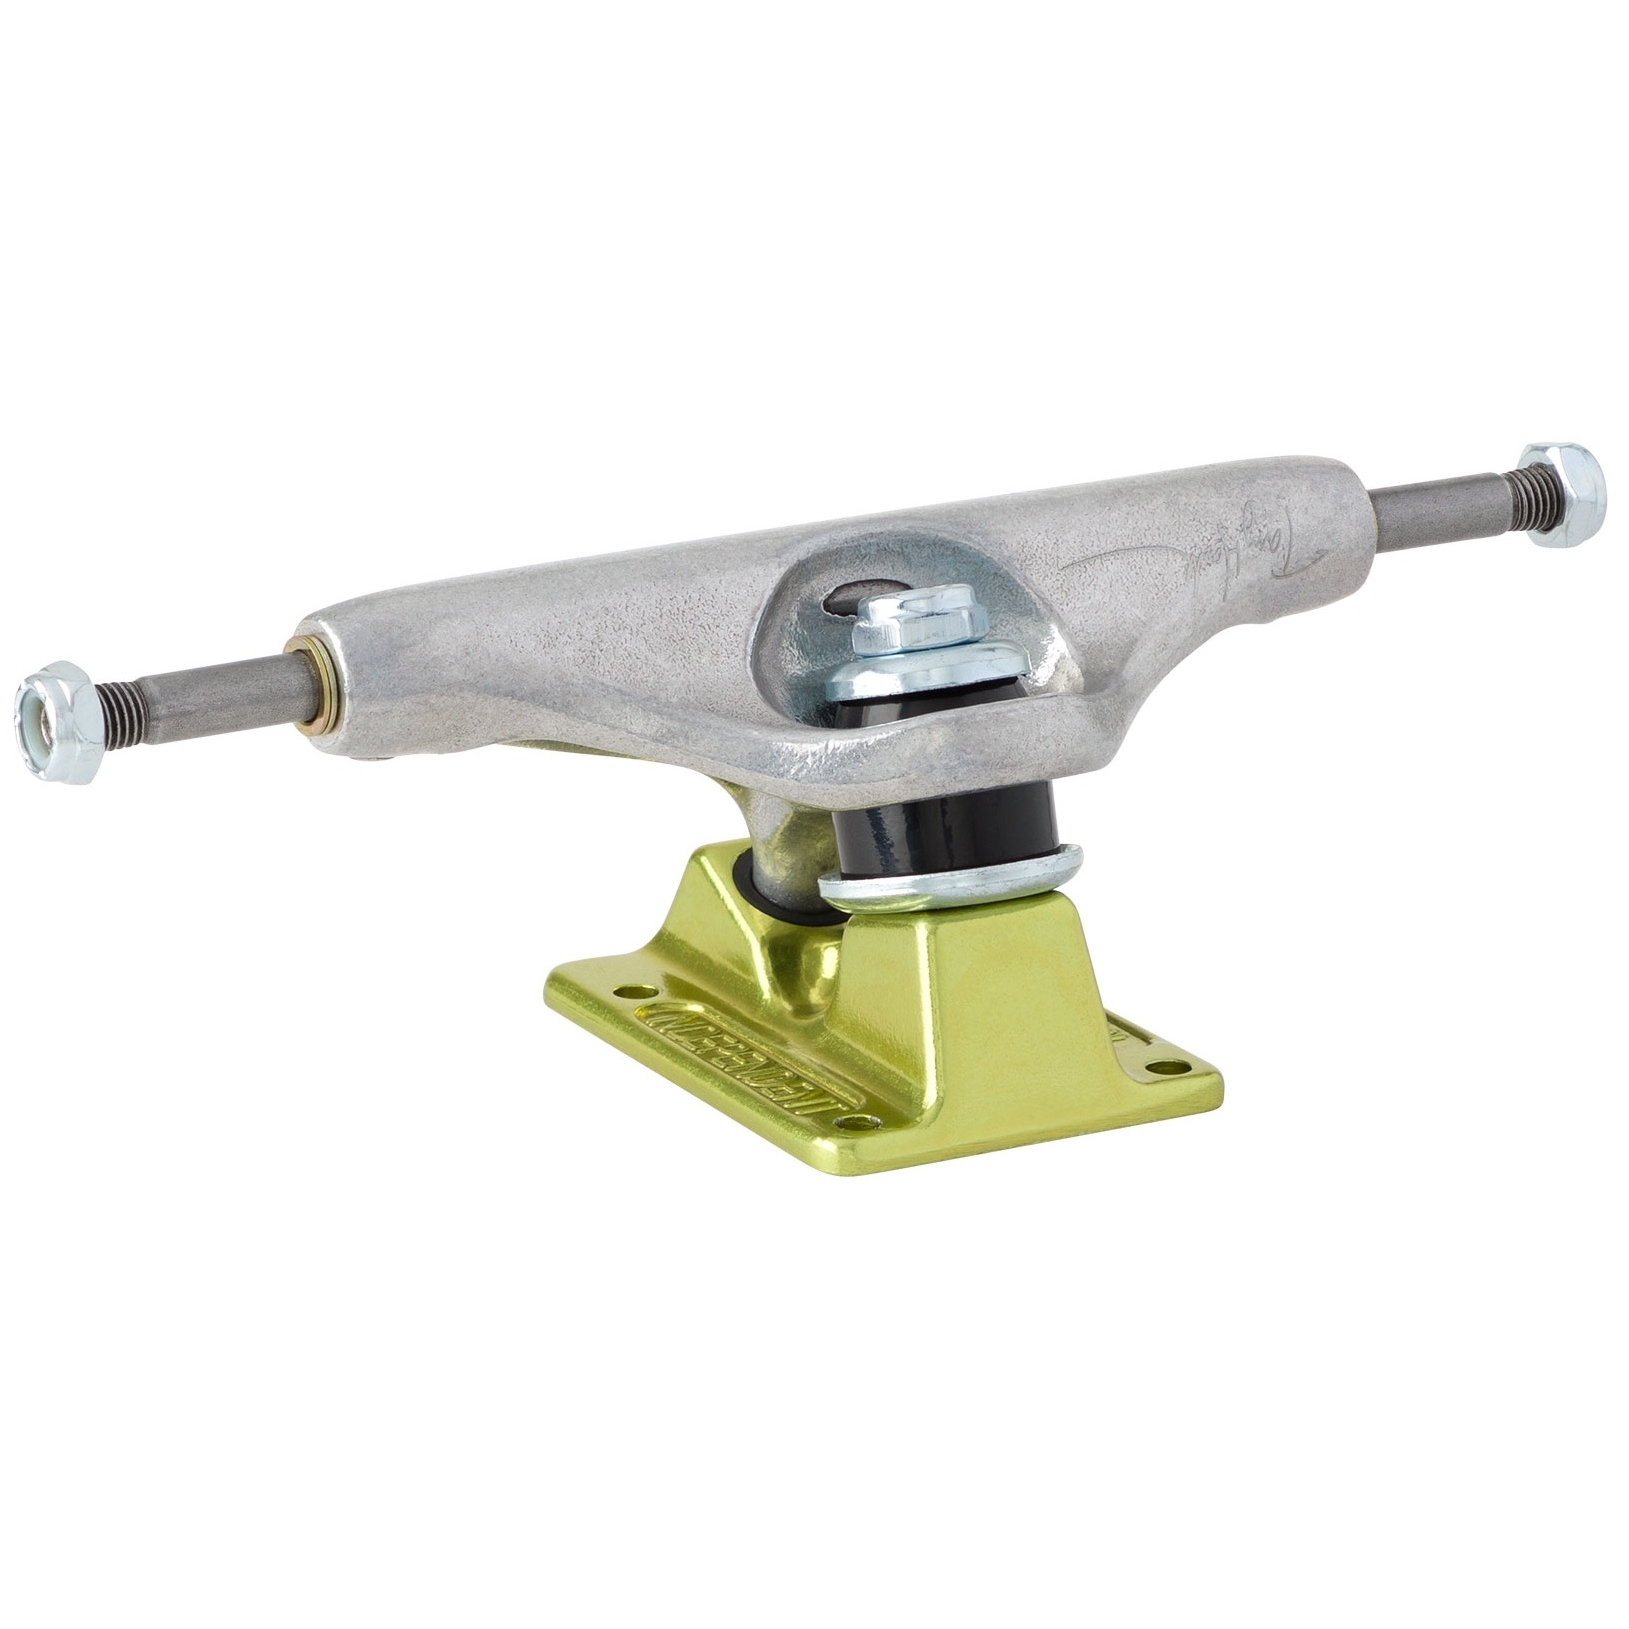 Independent Stage 11 Hawk Transmission Forged Hollow Truck (Silver/Green)  Trucks at Tempe